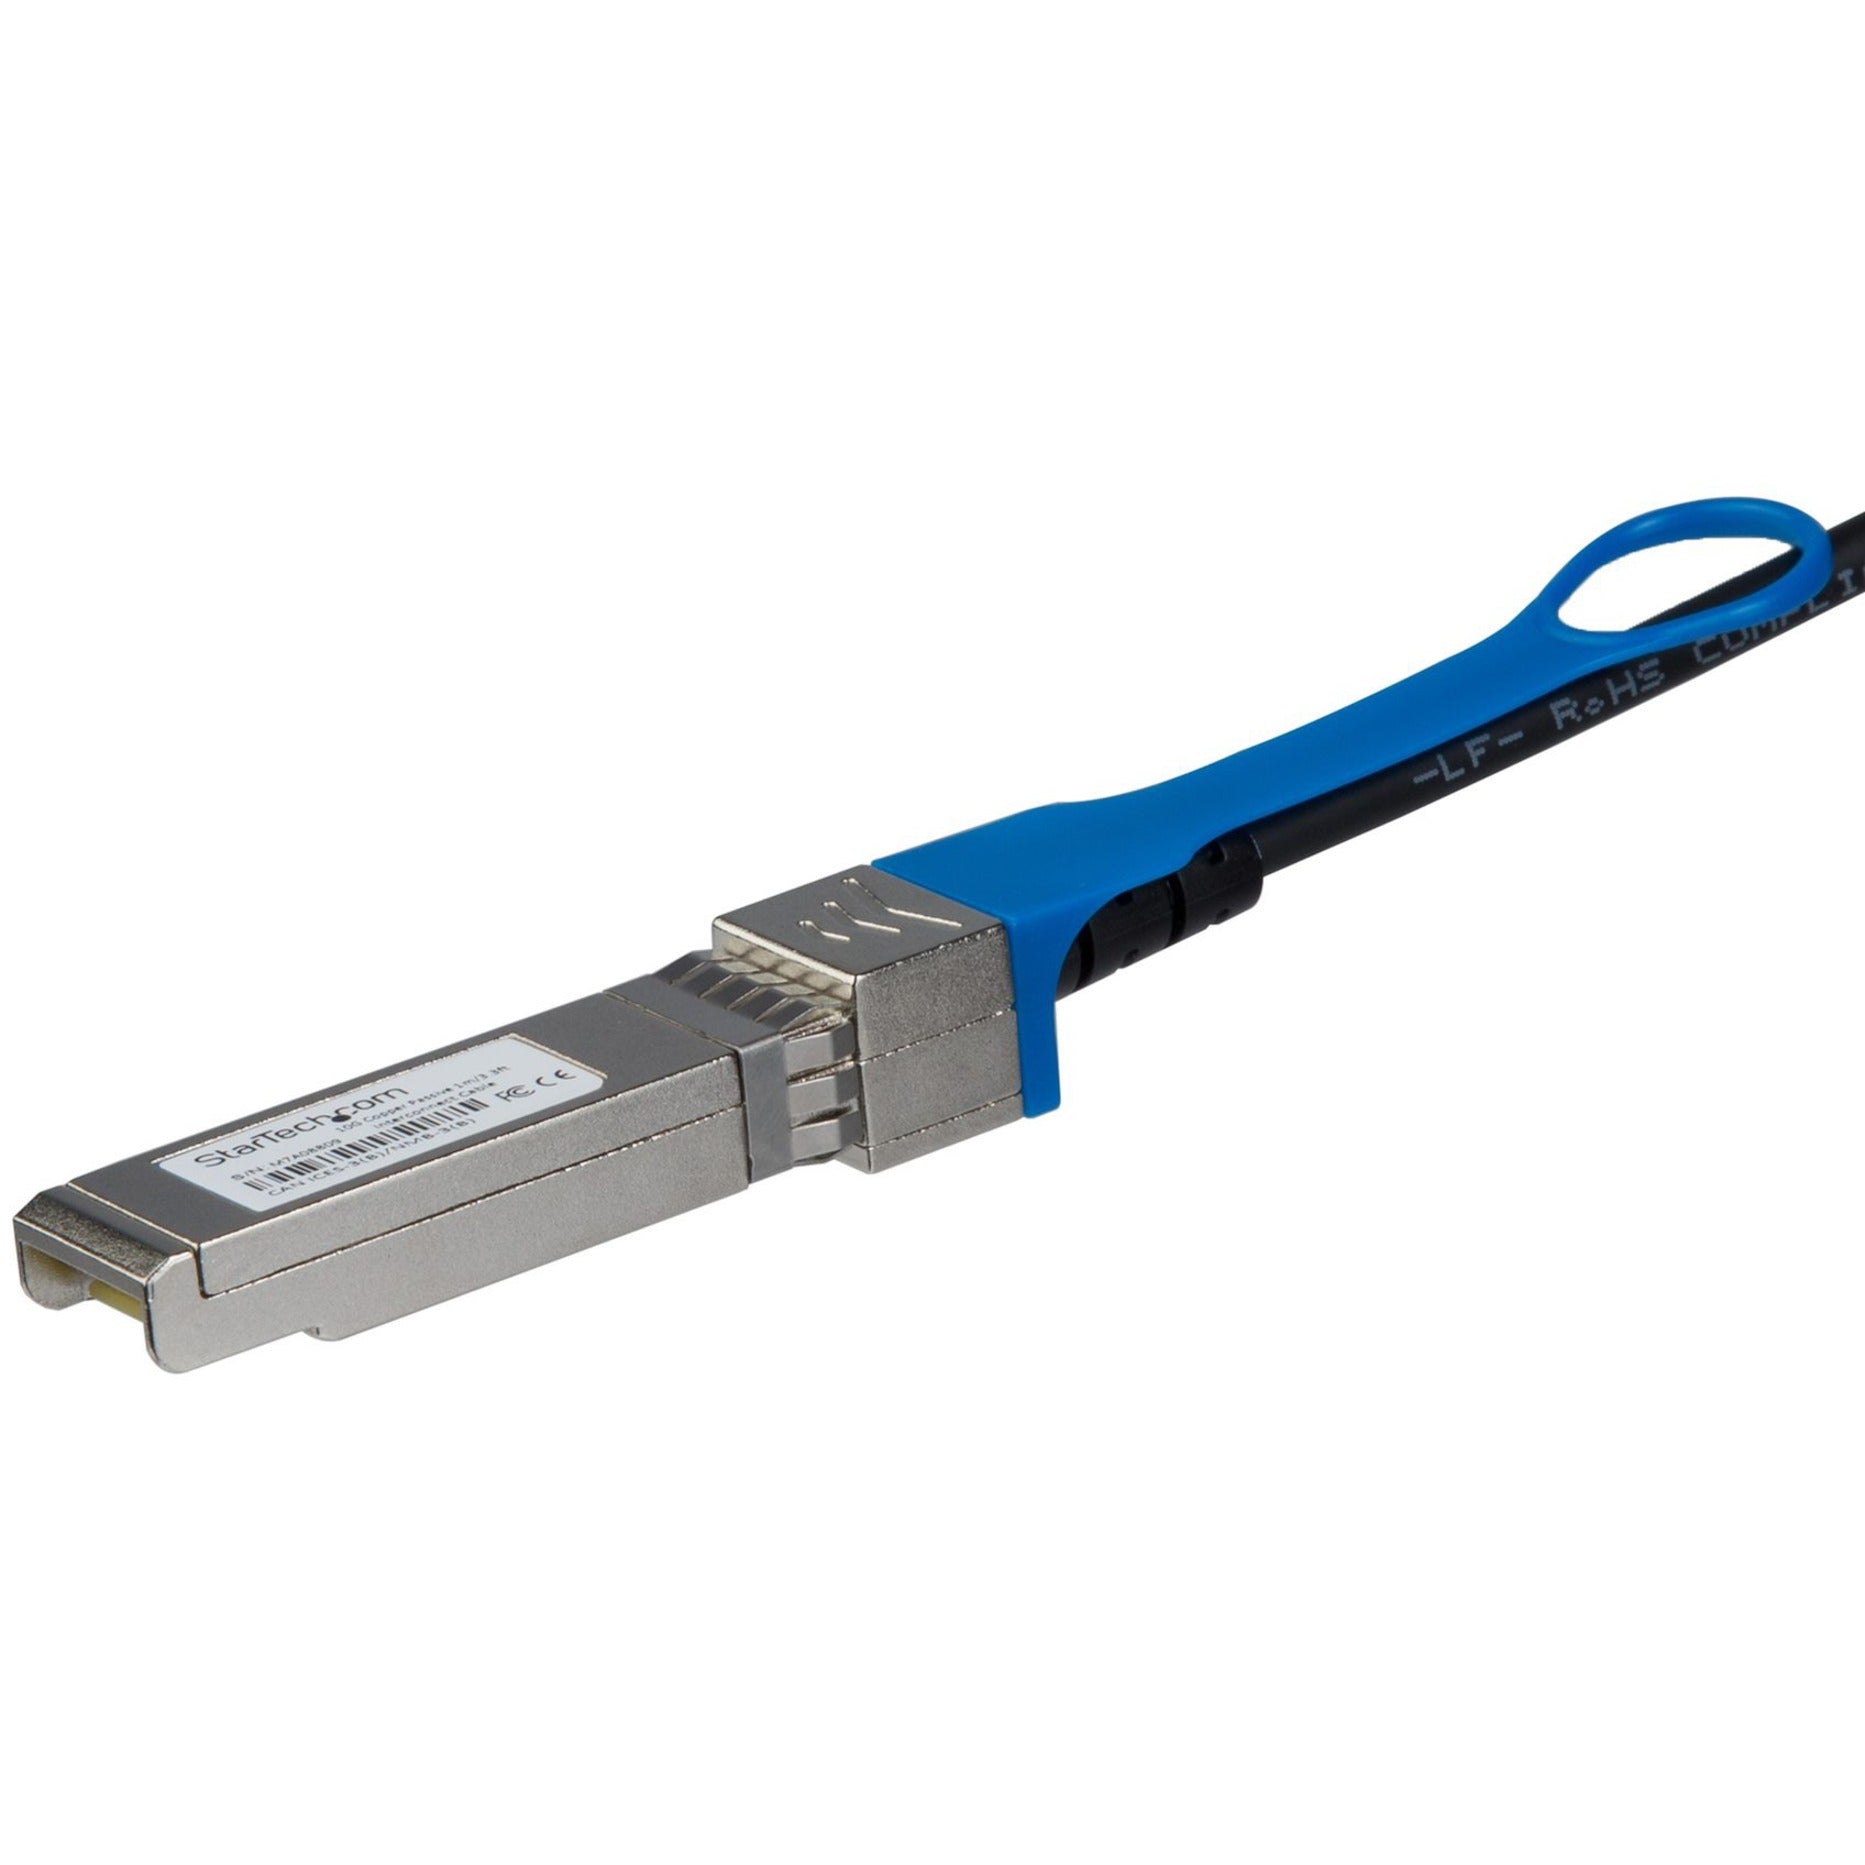 StarTech.com SFPH10GACU10 SFP+ Direct Attach Cable - 10 m (33 ft.), Hot-swappable, Active, 10 Gbit/s